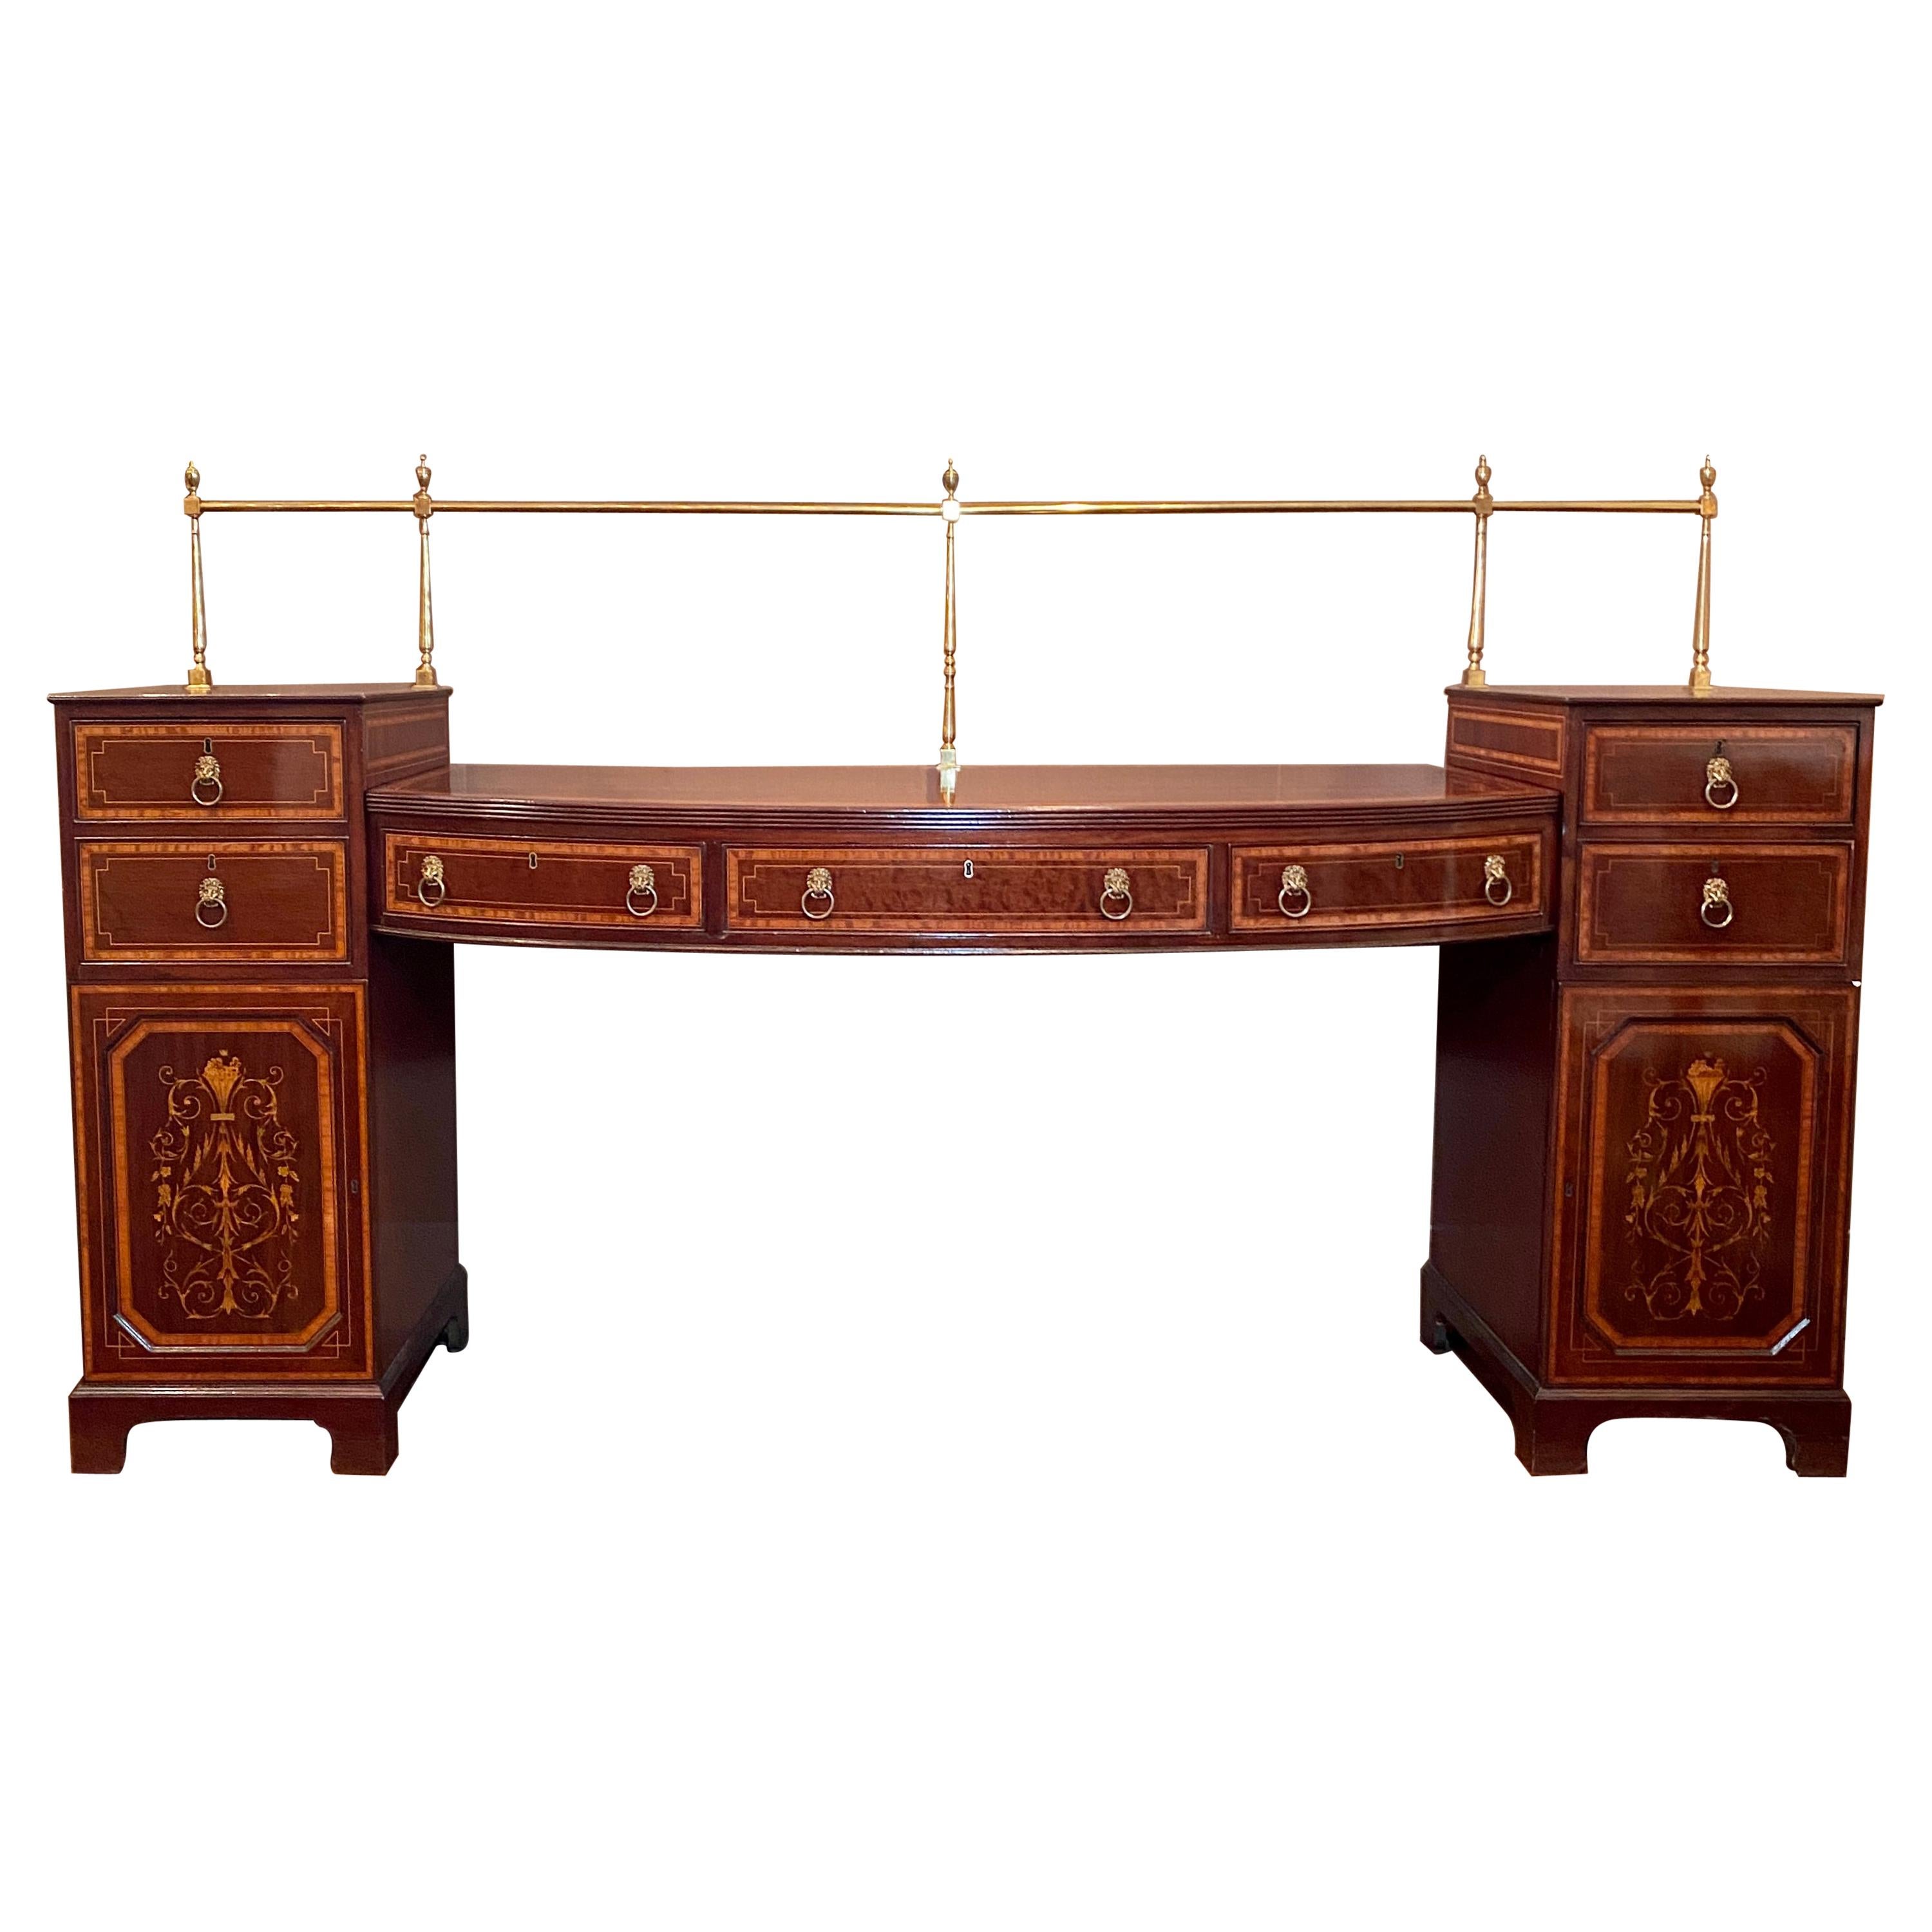 Antique English Sheraton Inlaid Mahogany Sideboard With Brass Rail, Circa 1870's For Sale